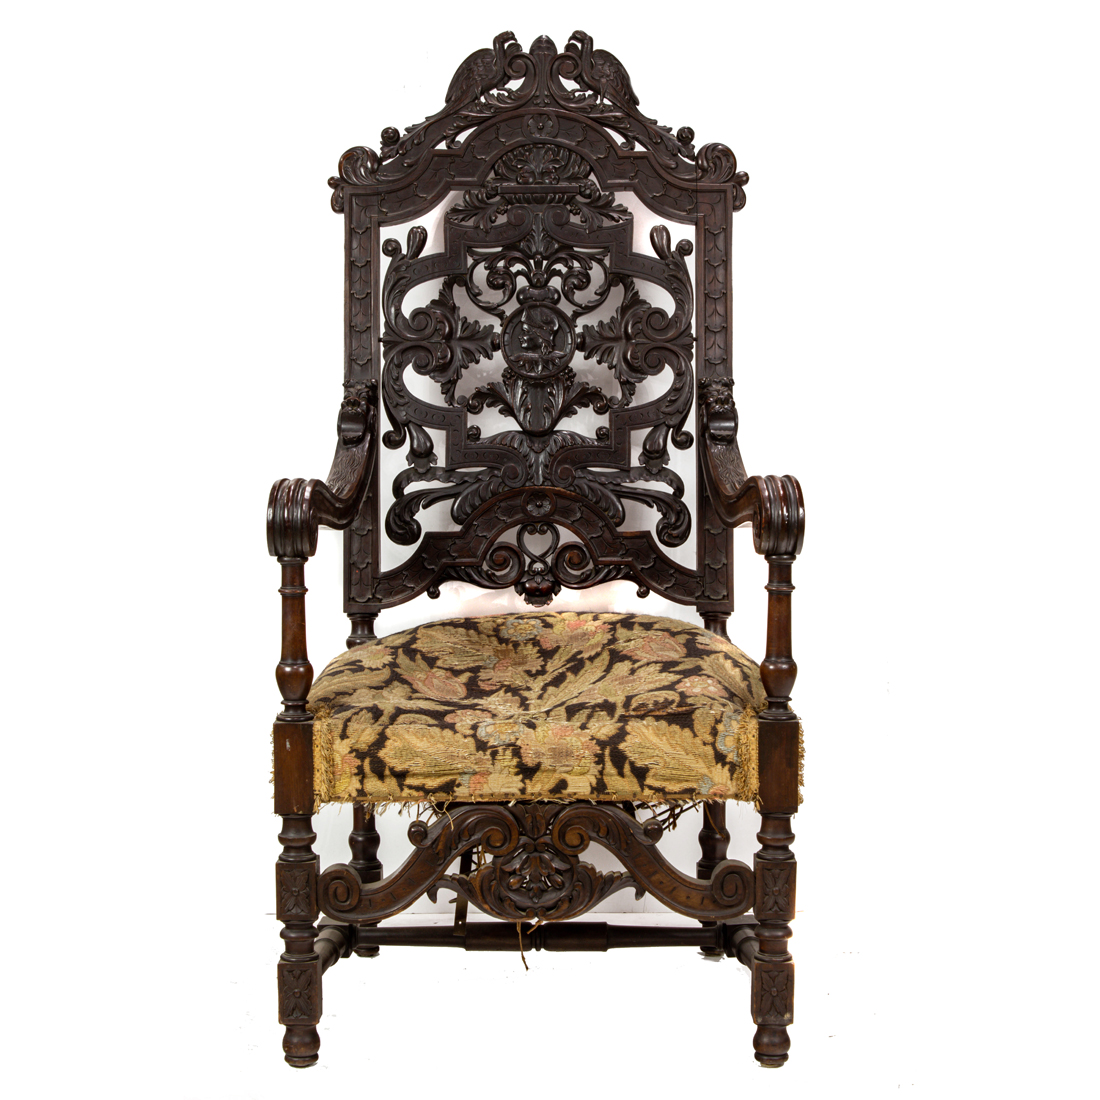 A BAROQUE STYLE REIN BACK CHAIR